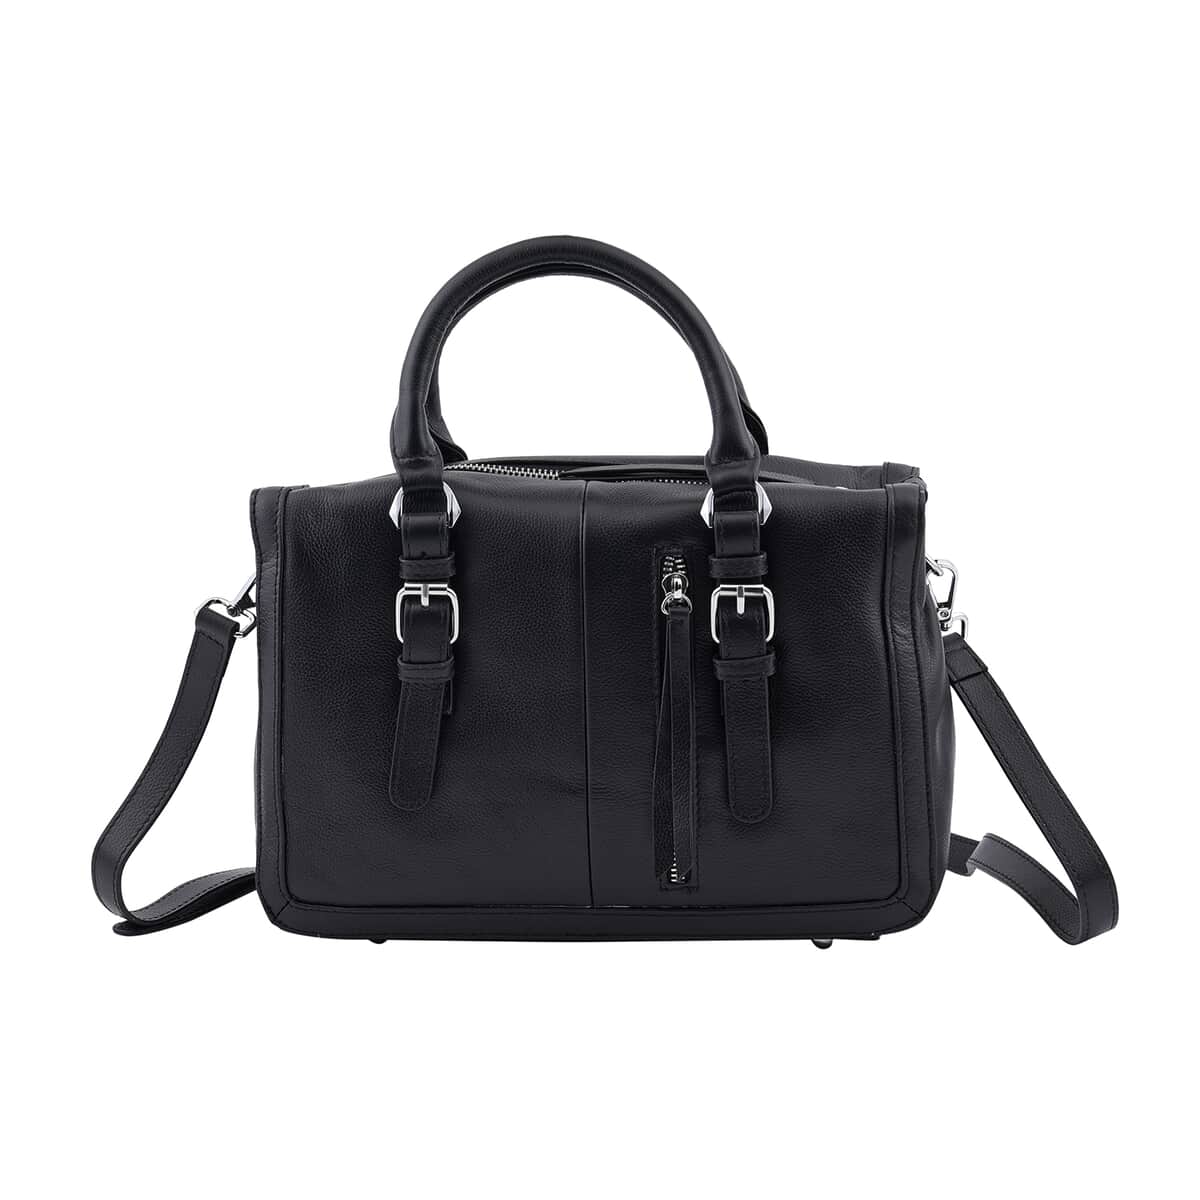 Black Genuine Leather Tote Bag with Top Double Handles and Shoulder Strap image number 0